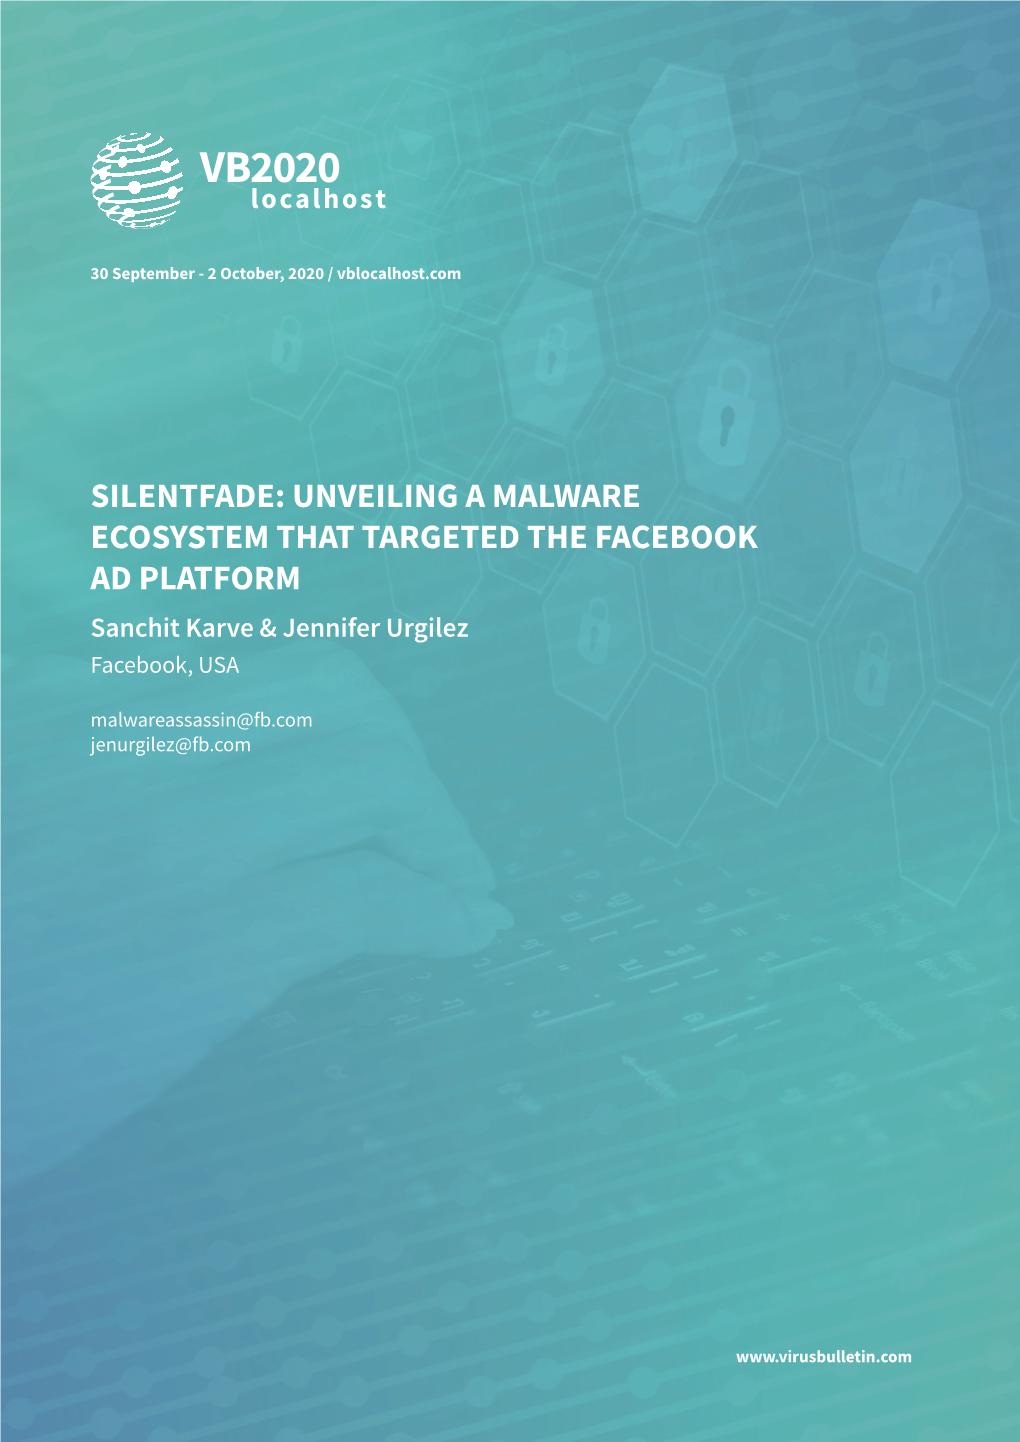 VB2020 Paper: Silentfade: Unveiling a Malware Ecosystem That Targeted